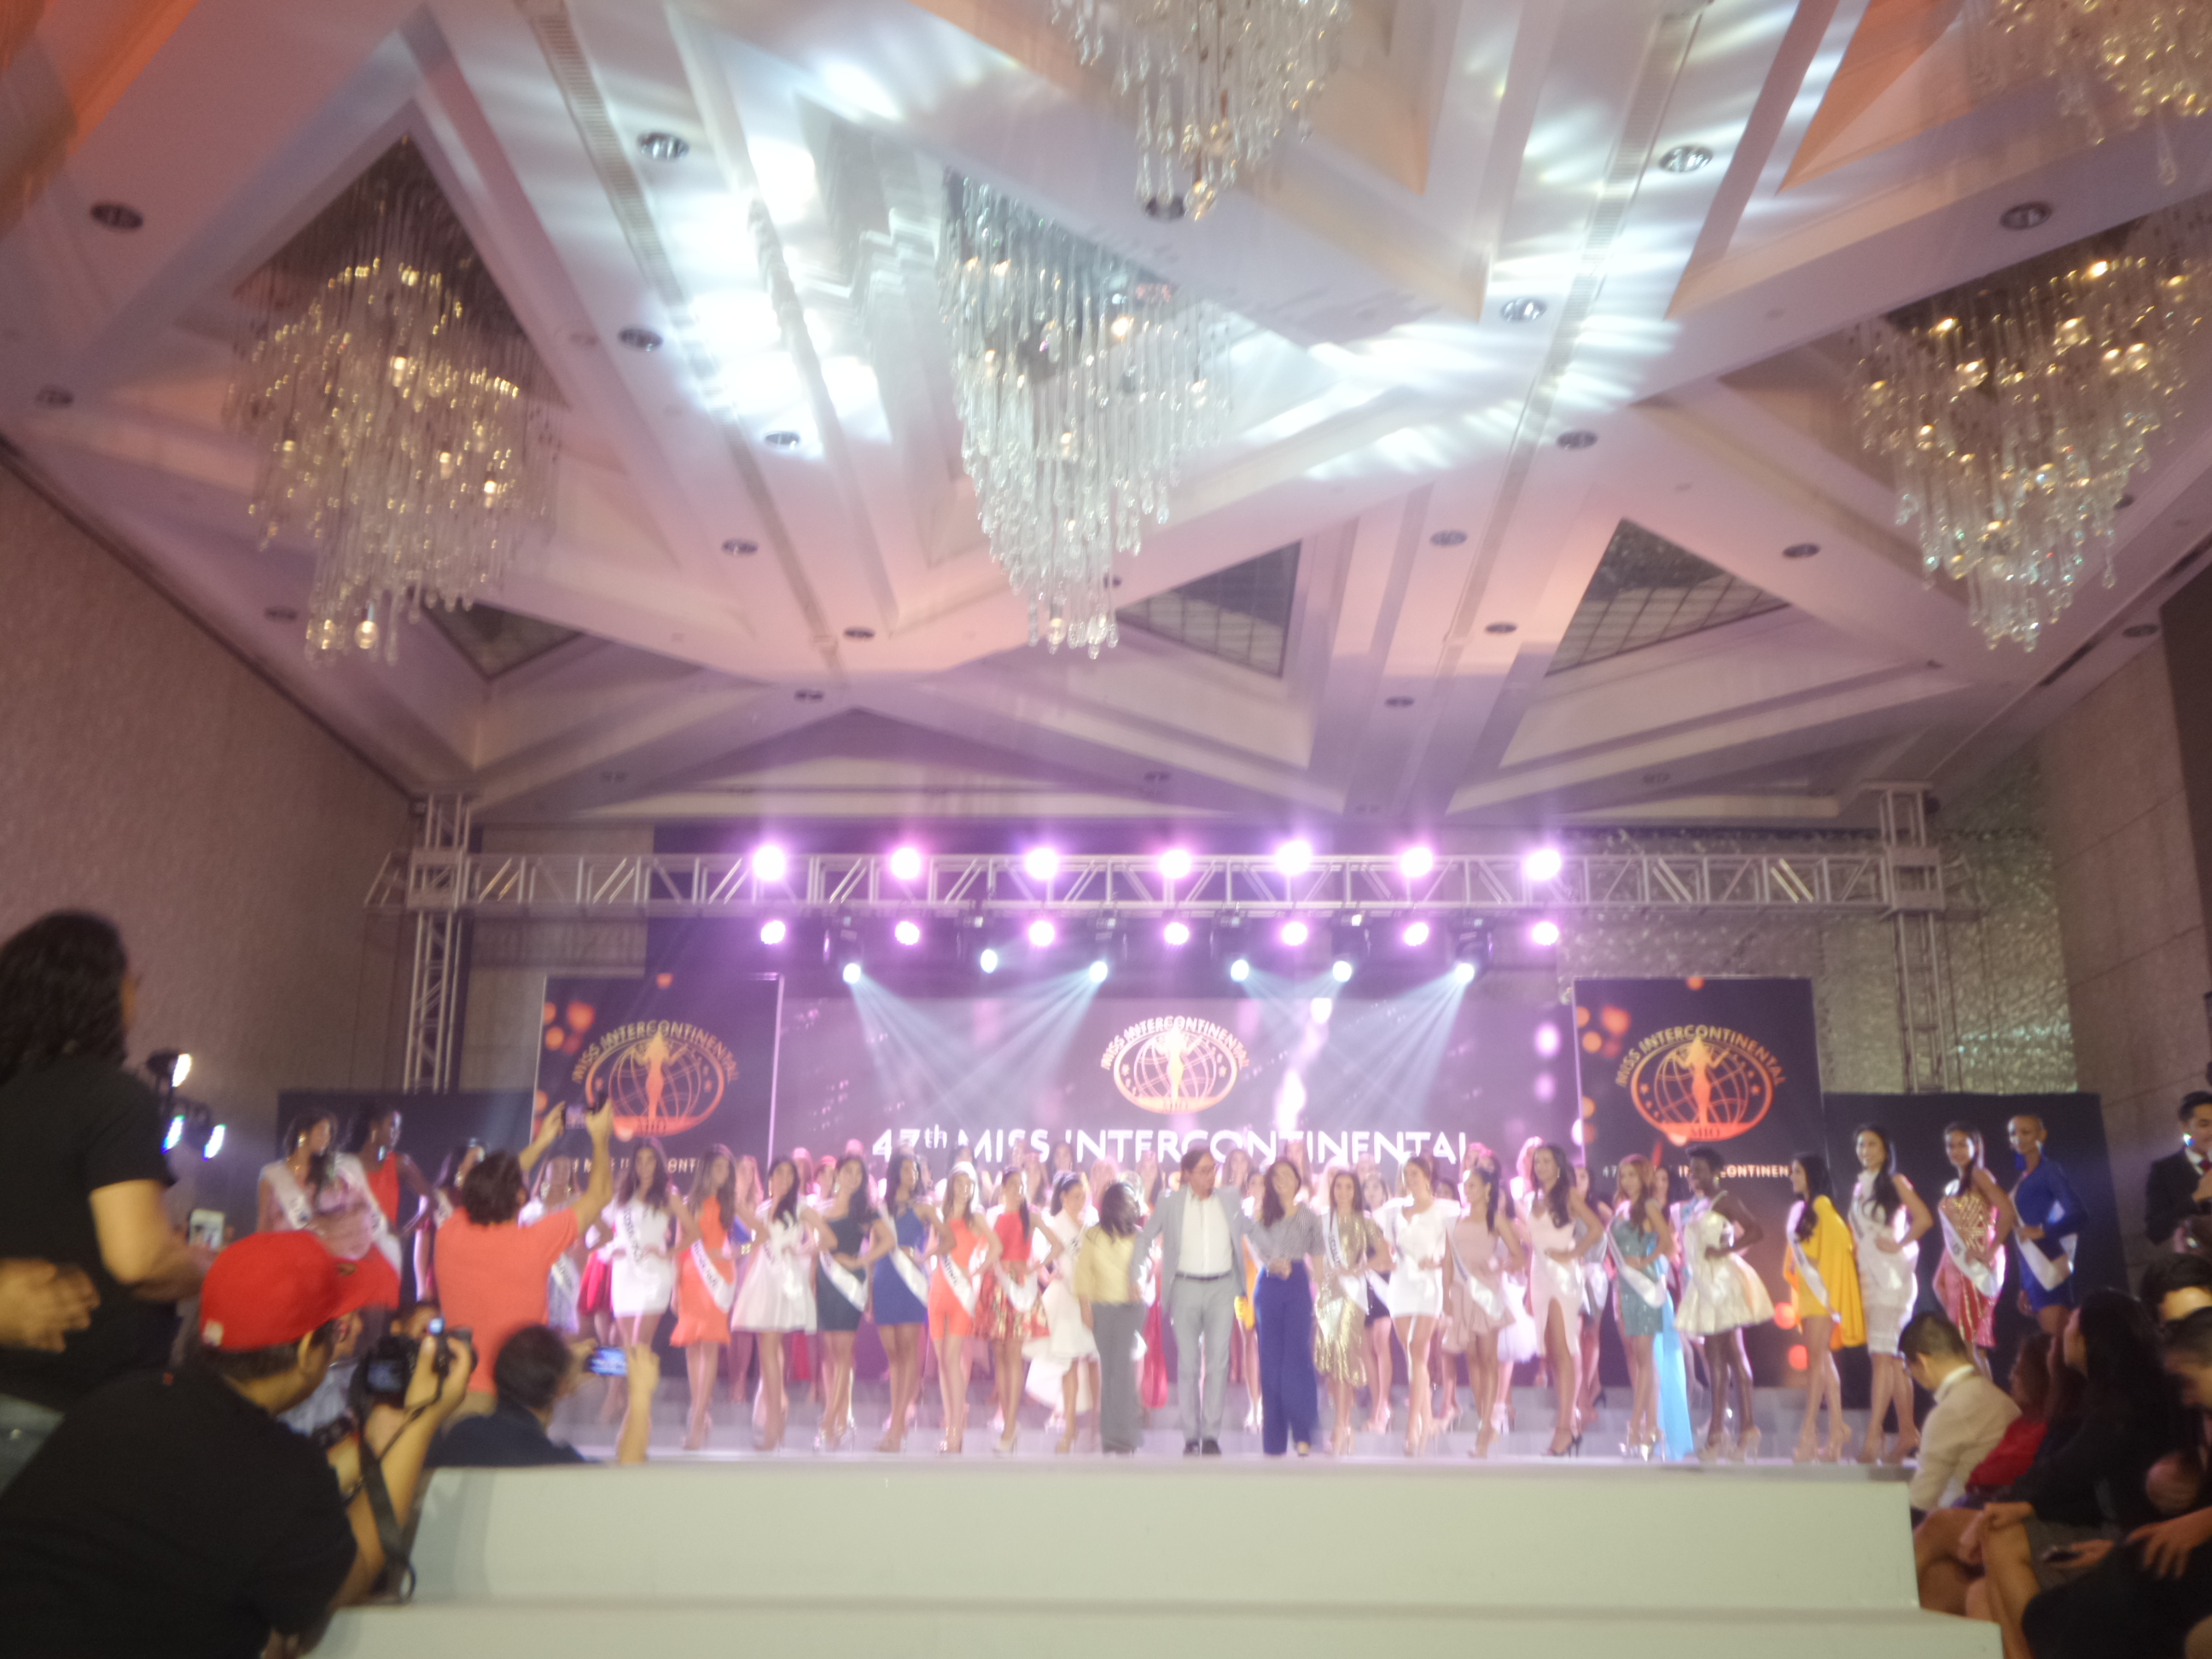 Philippines chosen as venue for Miss International pagent